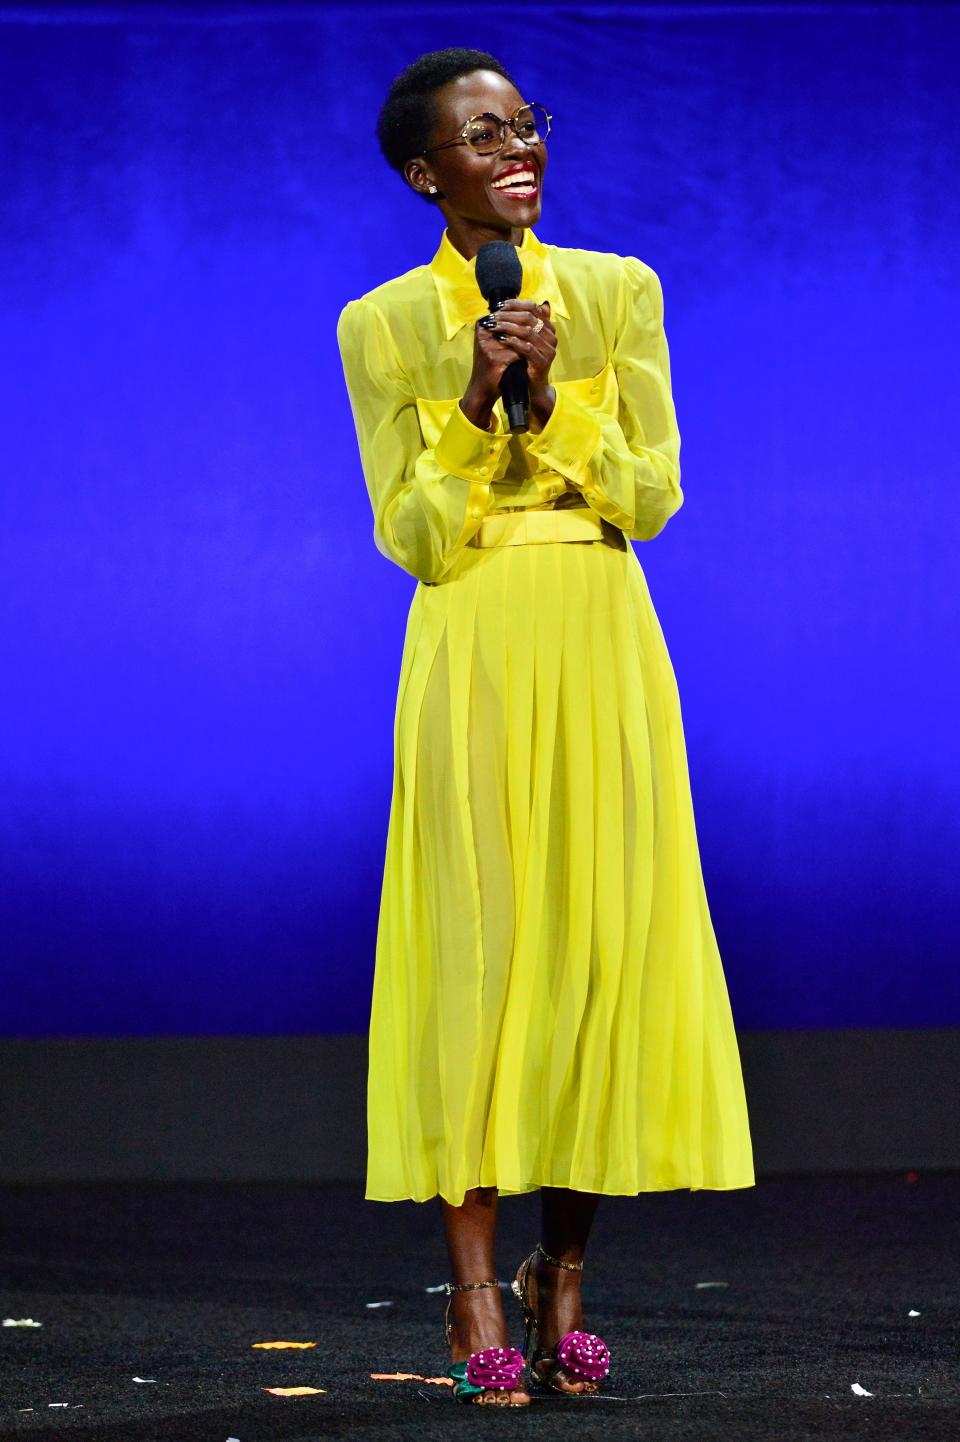 LAS VEGAS, NEVADA - APRIL 10: Lupita Nyong'o speaks onstage during the Universal Pictures and Focus Features Special Presentation, featuring footage from their upcoming slate, during CinemaCon, the official convention of the National Association of Theatre Owners, at Caesars Palace on April 10, 2024 in Las Vegas, Nevada. (Photo by Jerod Harris/Getty Images for CinemaCon)